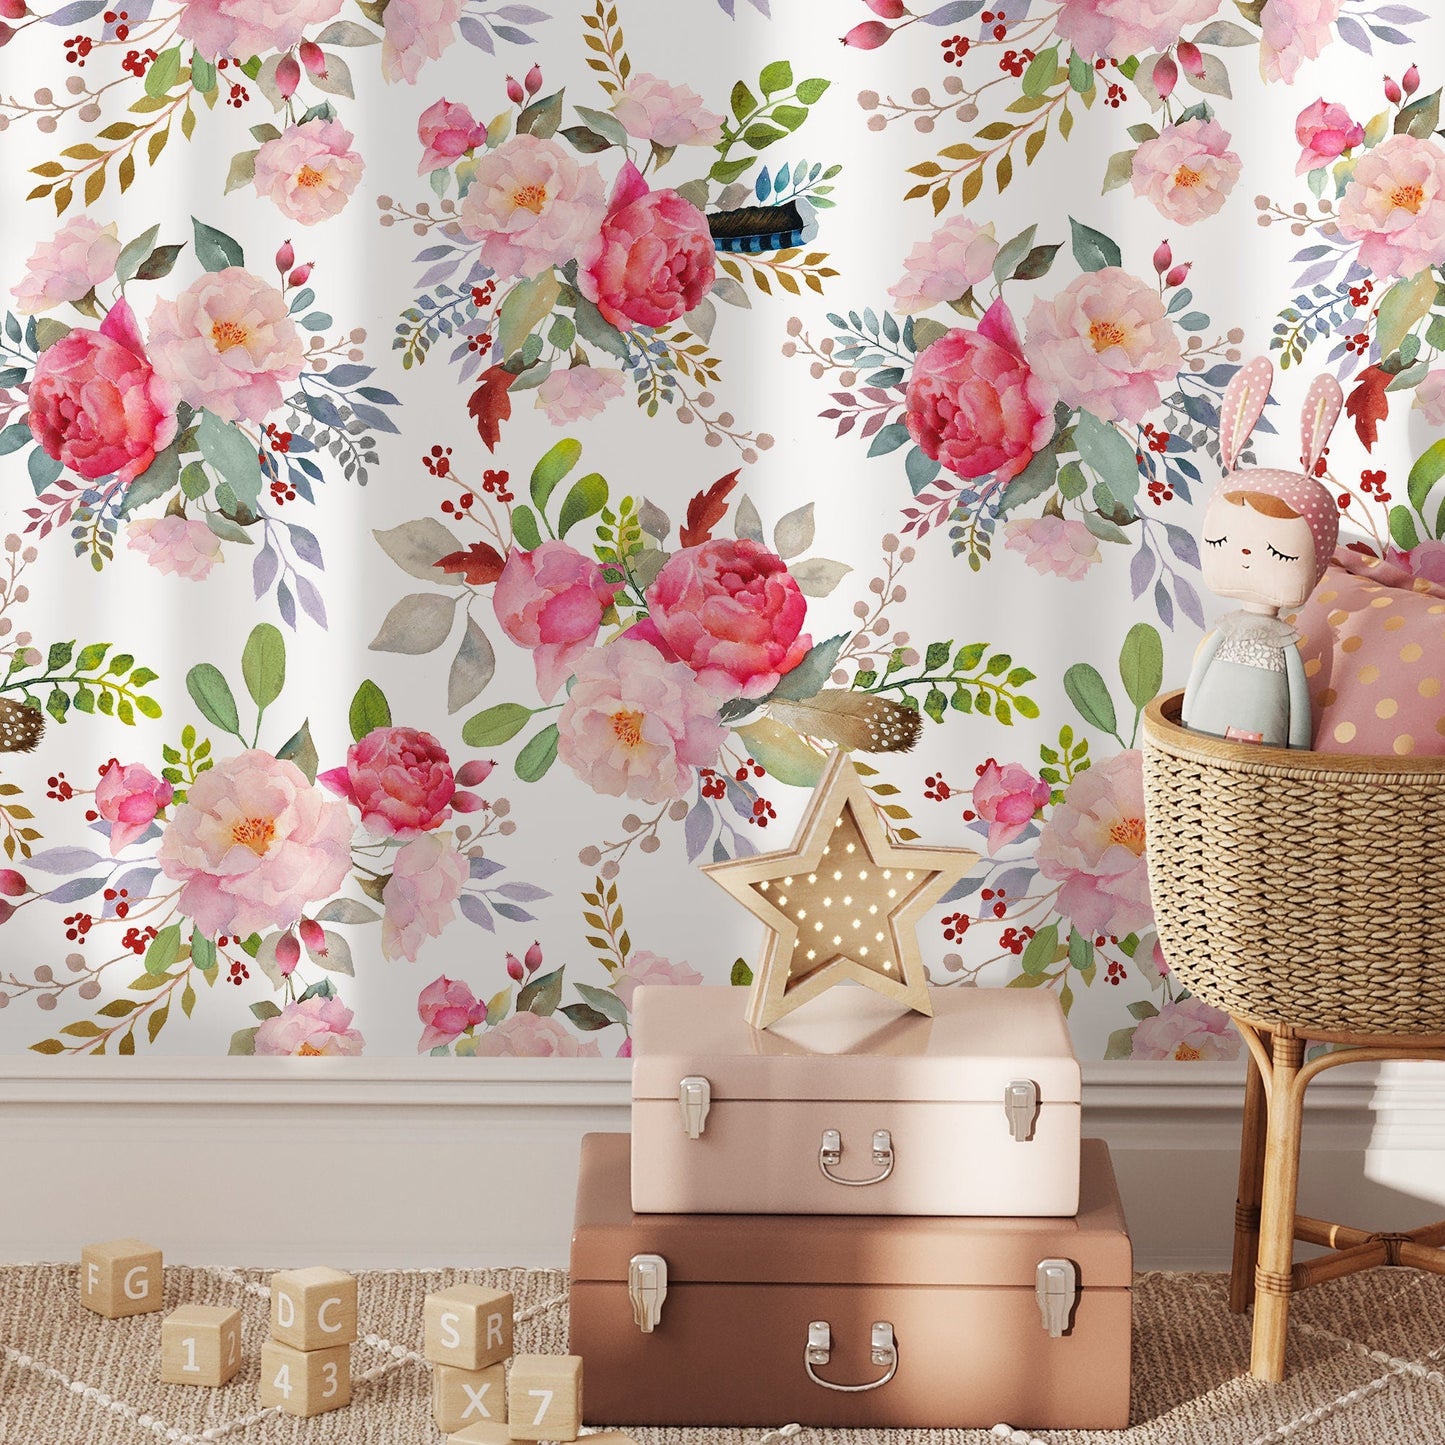 Watercolor Floral Wallpaper, Removable Wall Decor, Temporary Wallpaper, Peel and Stick Wallpaper, Wall Paper Removable - A184